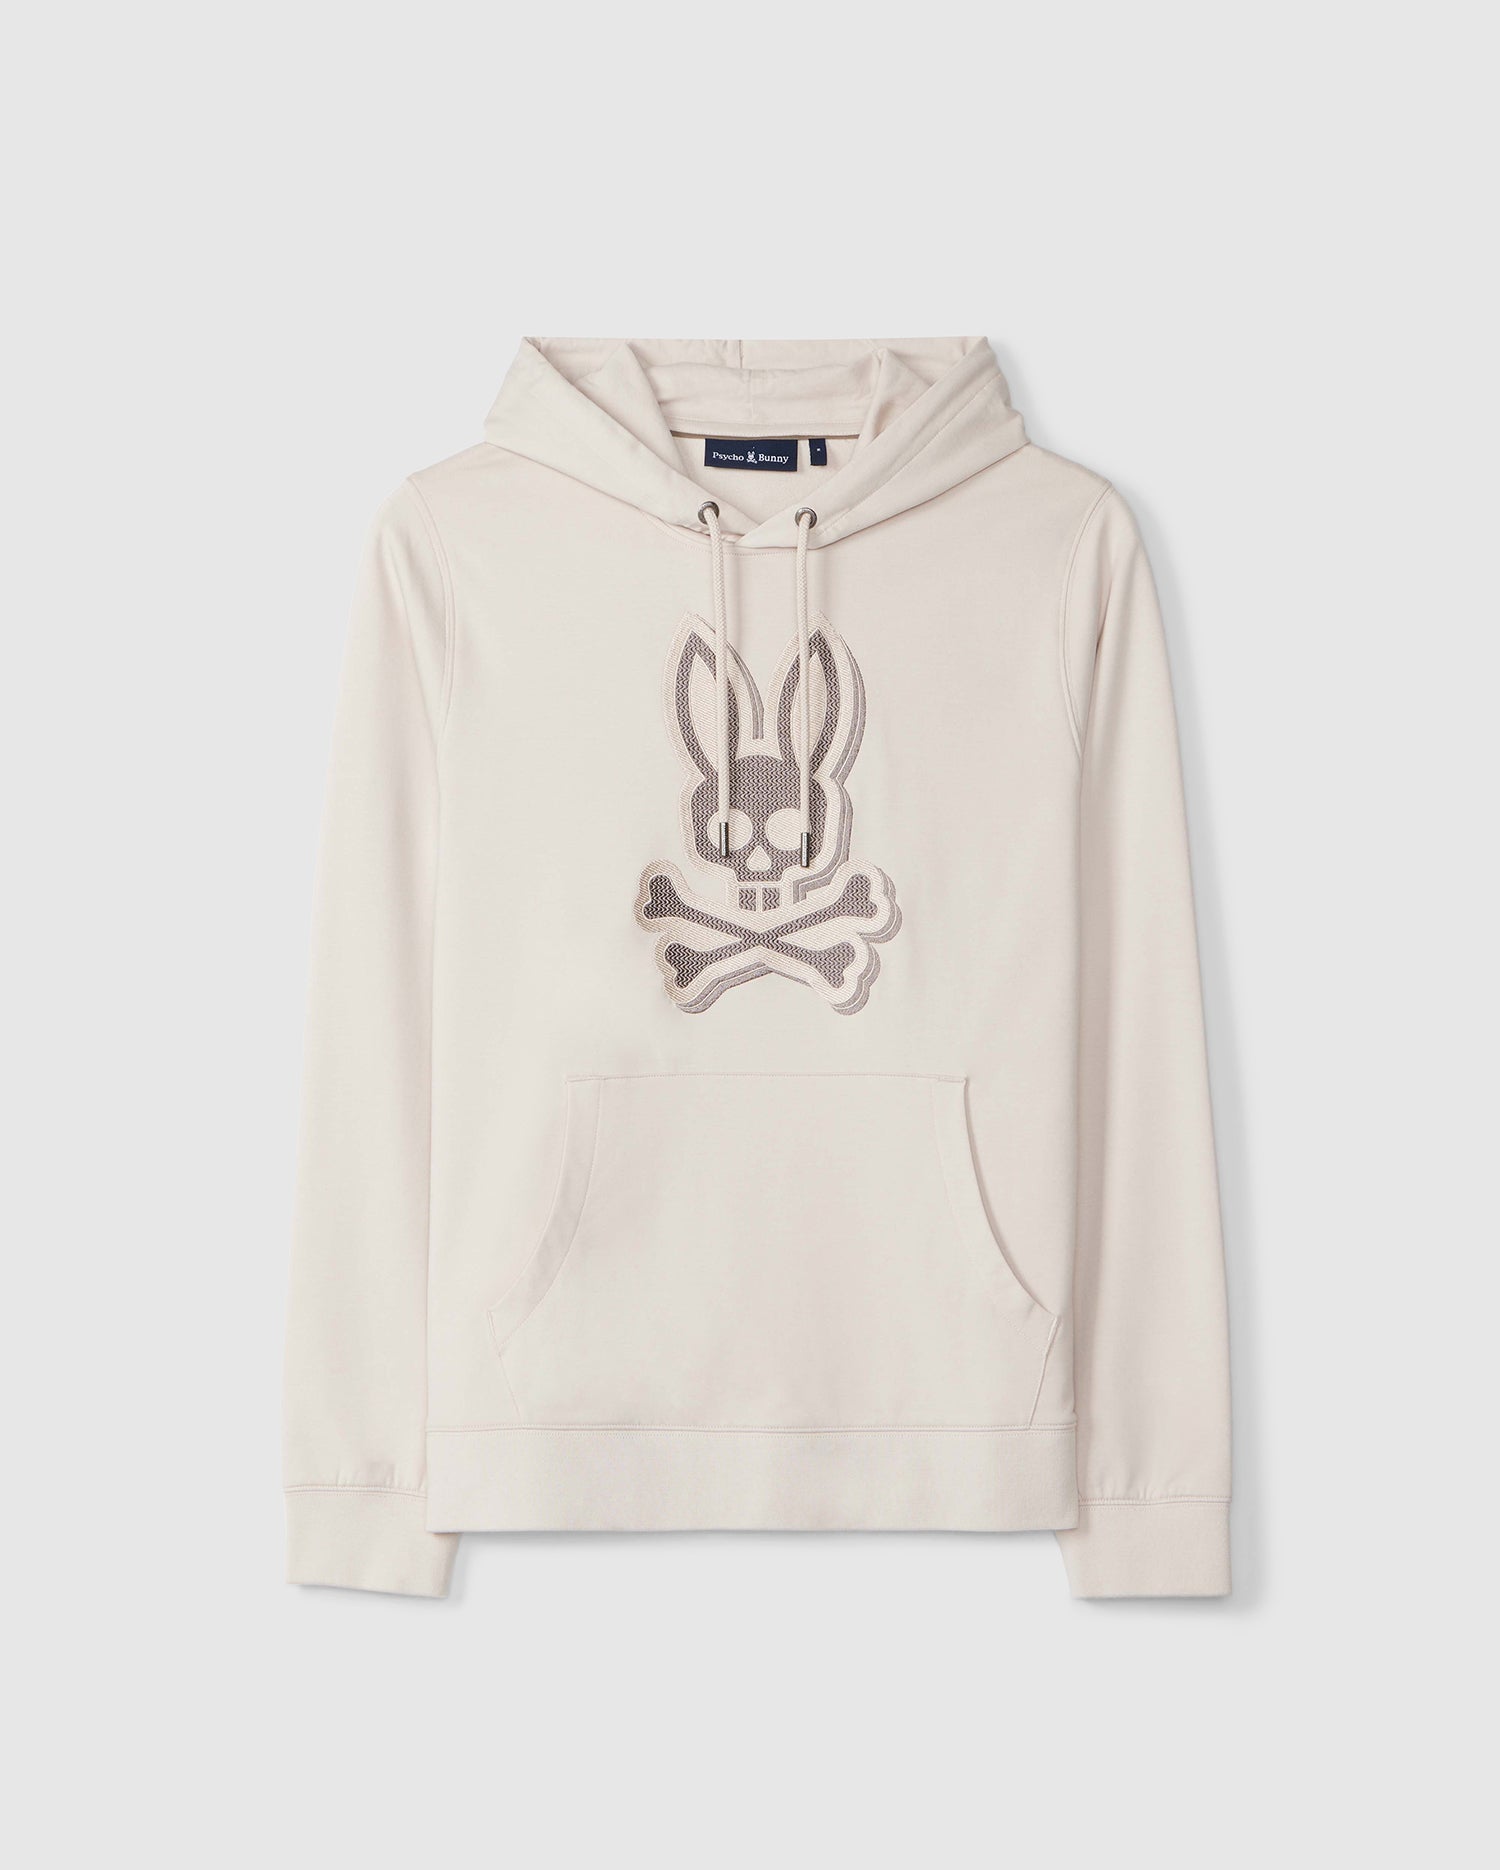 A cream-colored Psycho Bunny MENS LIVINGSTON PULLOVER HOODIE - B6H246B200 with a front pouch pocket, featuring an embroidered Bunny-design of a rabbit head and crossed bones in light brown thread. The hoodie is crafted from micro French terry.